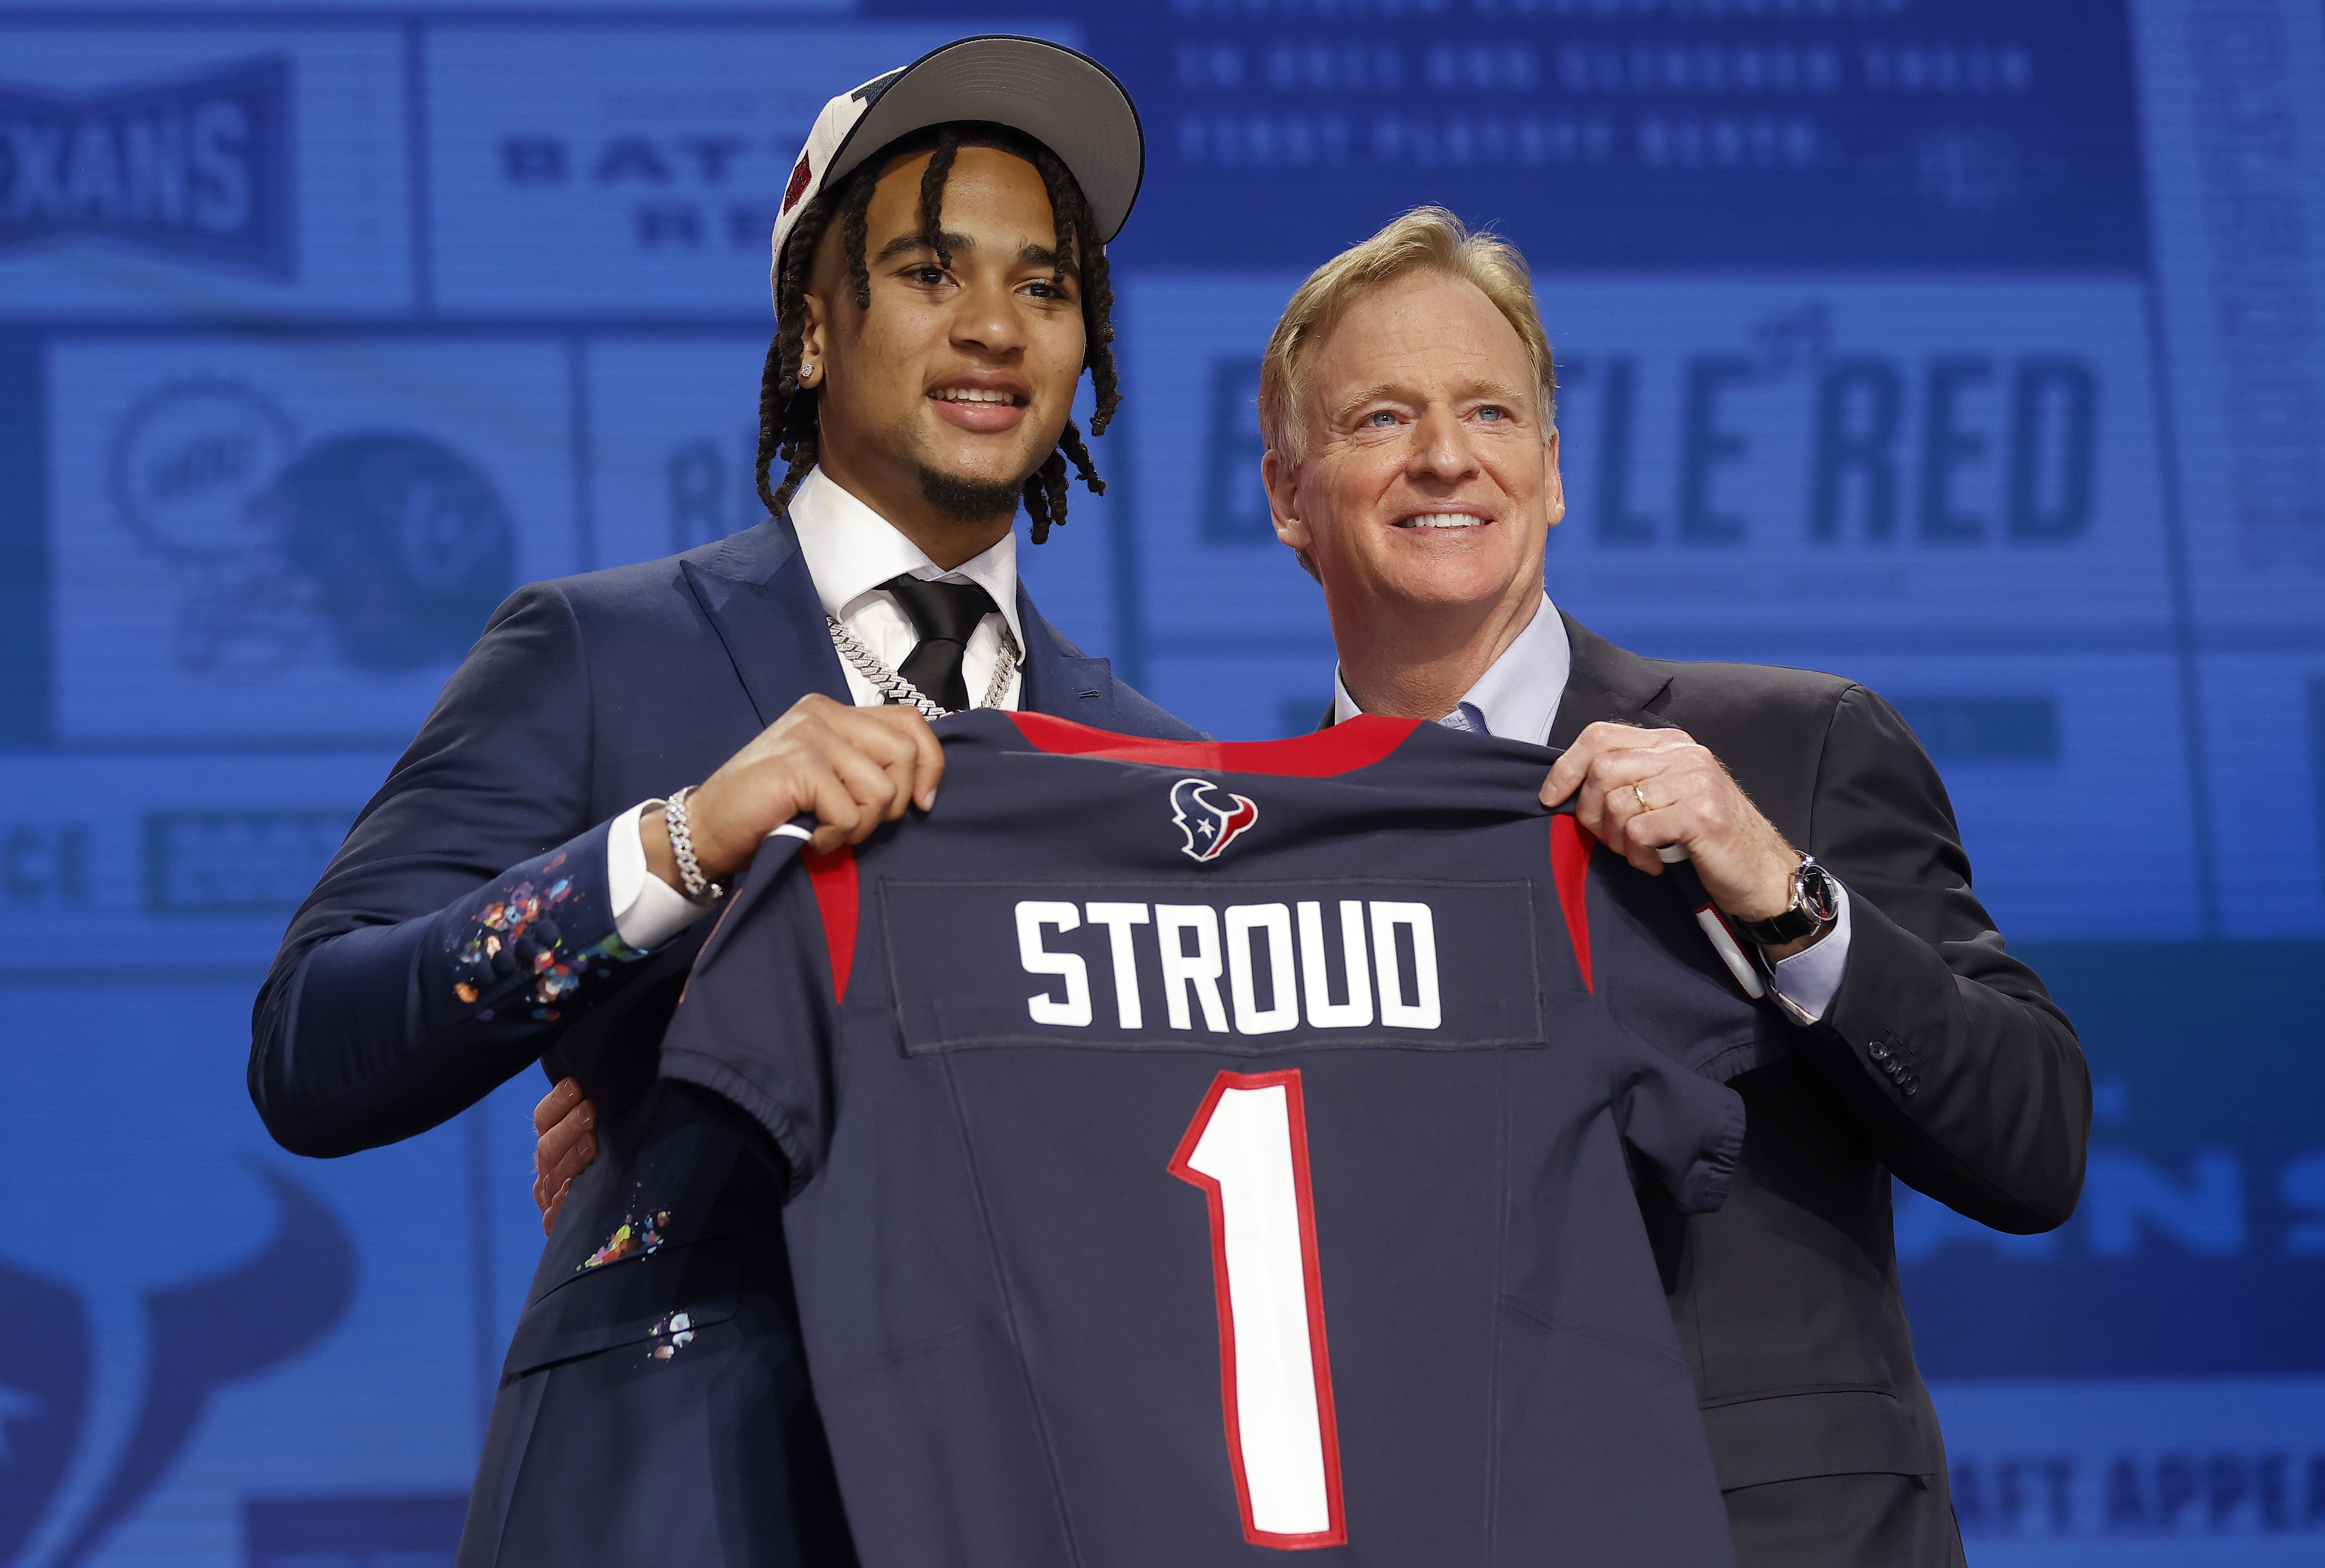 Quarterback C.J. Stroud (L) from Ohio State University is selected by the Houston Texans with the second-overall pick in the NFL Draft at Union Station in Kansas City, Missouri, April 27, 2023. /CFP